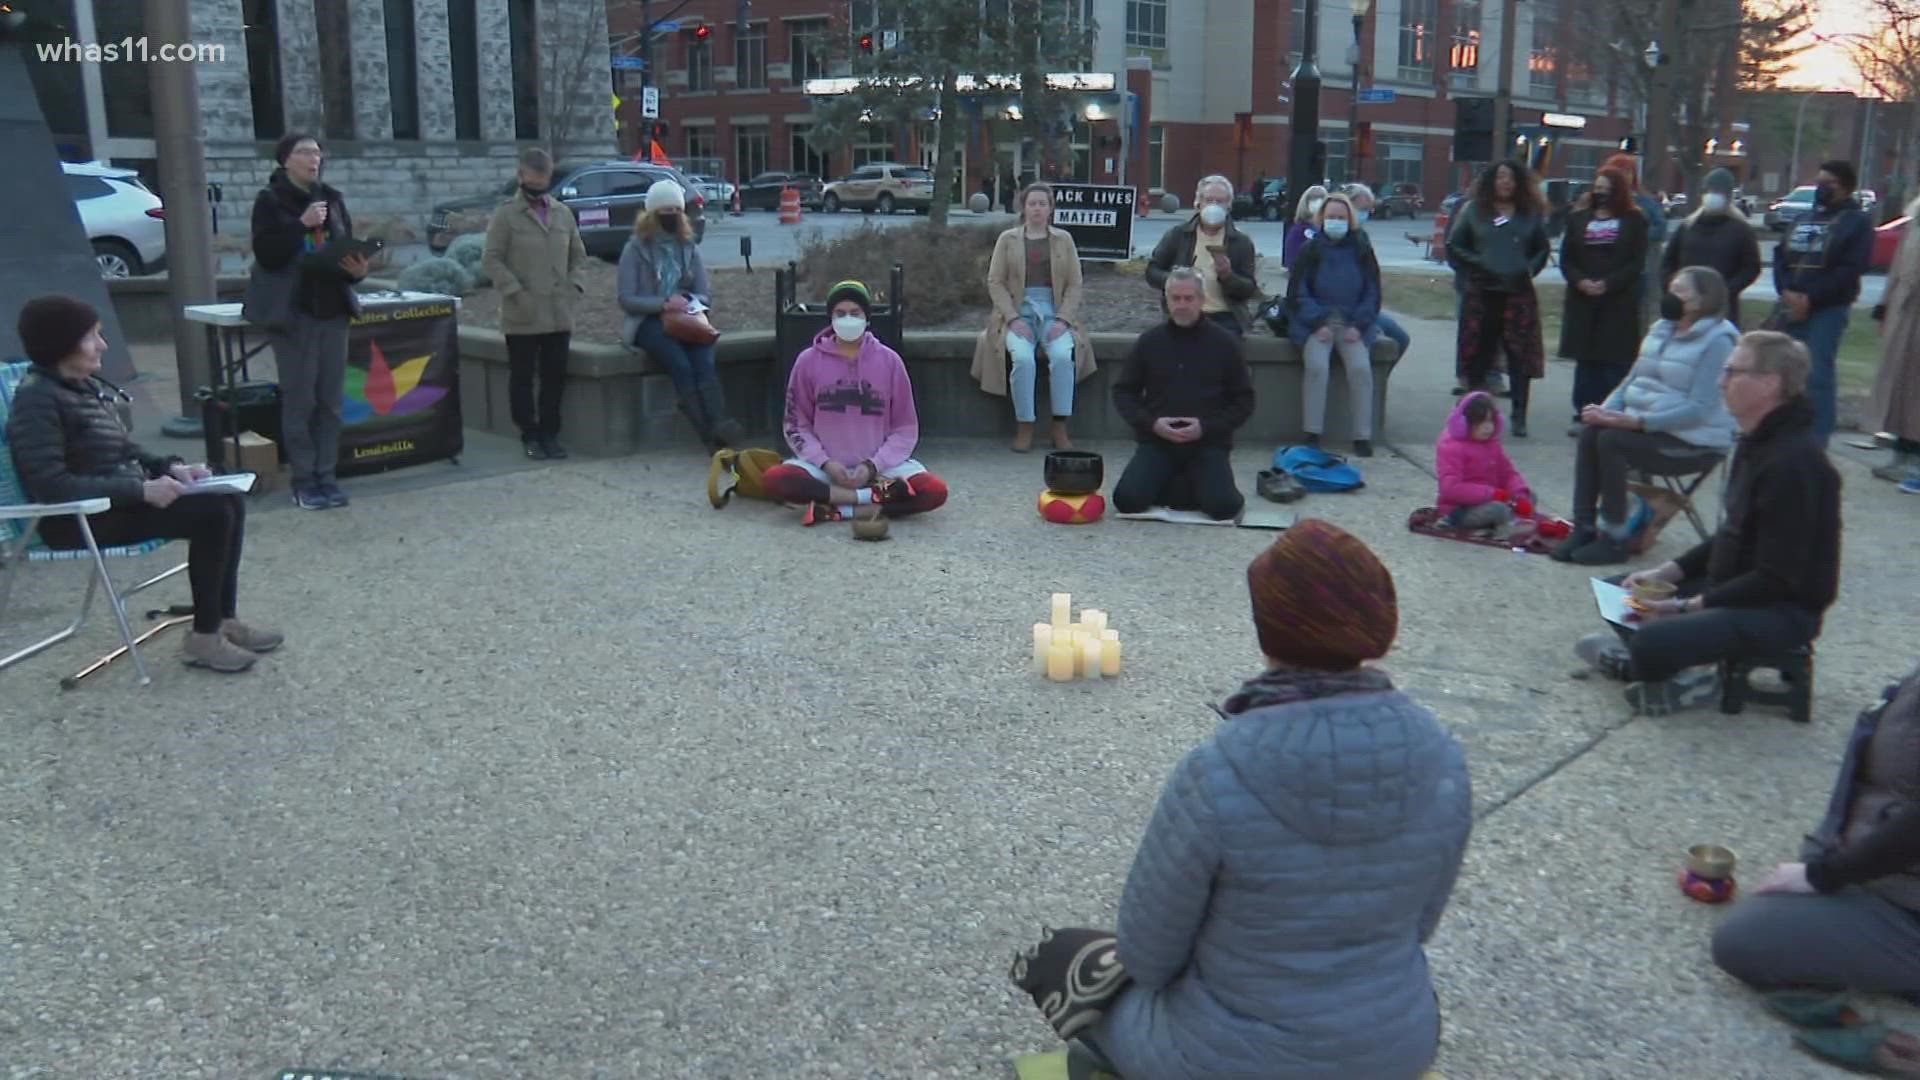 The Buddhist Justice Collective held a vigil at Jefferson Square Park. The vigil honored five people who have died while in custody since November.